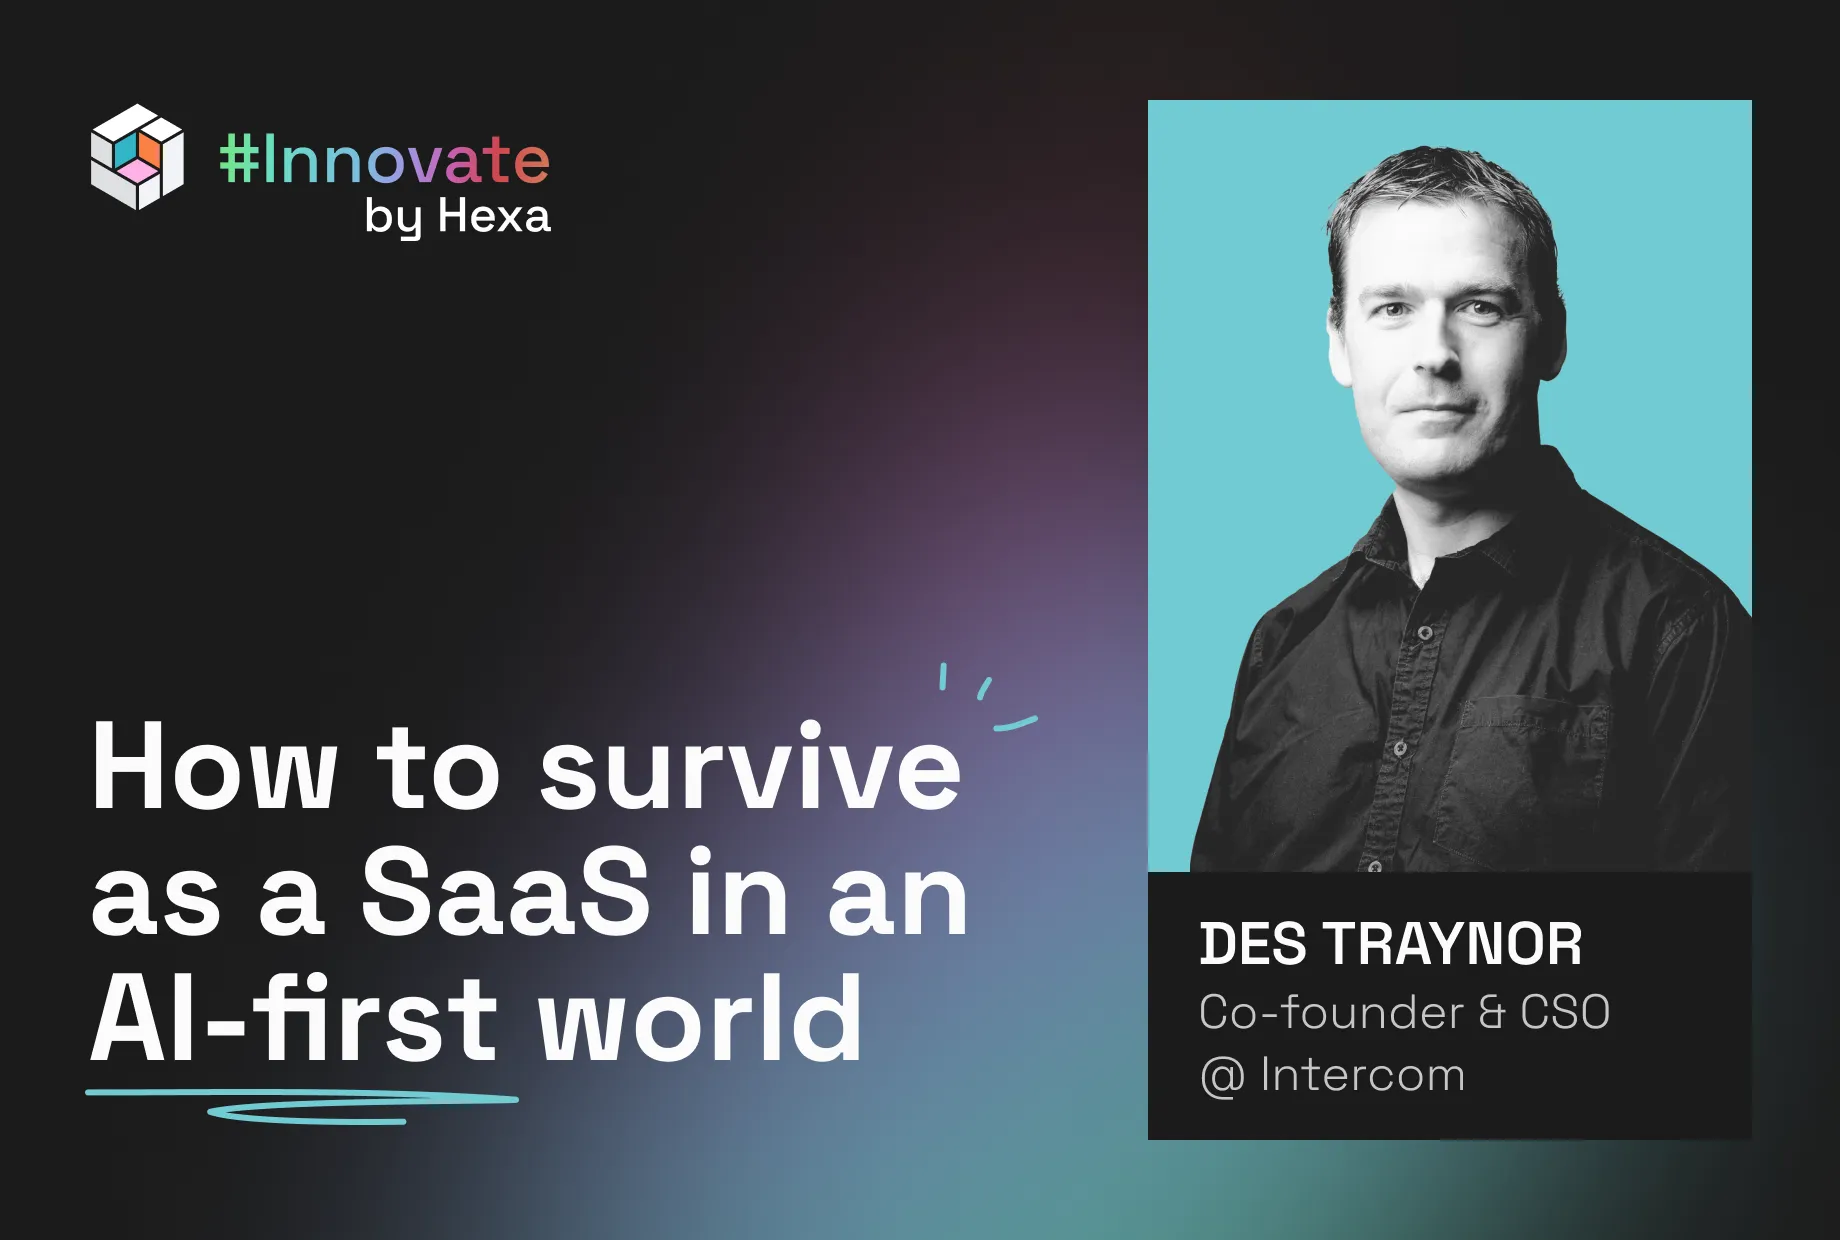 How to survive as a SaaS in an AI-first world